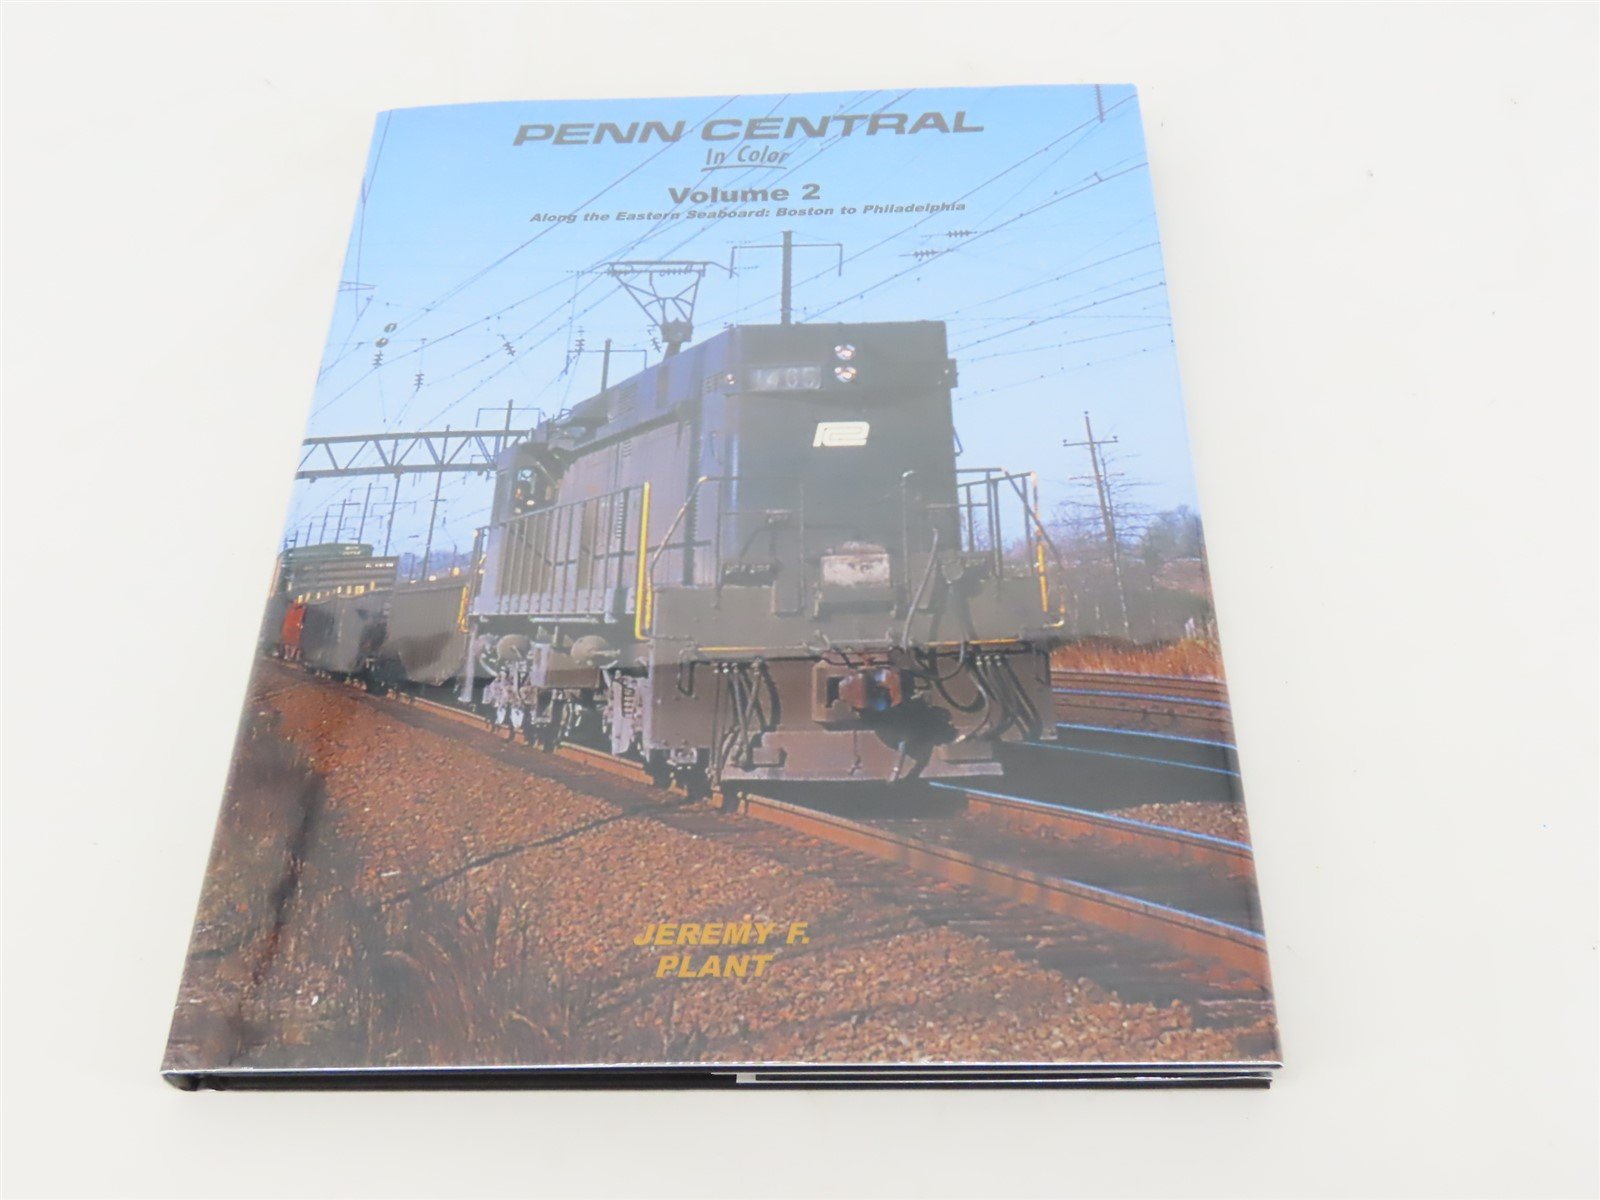 Morning Sun: Penn Central In Color Volume 2 by Jeremy F Plant ©2009 HC Book